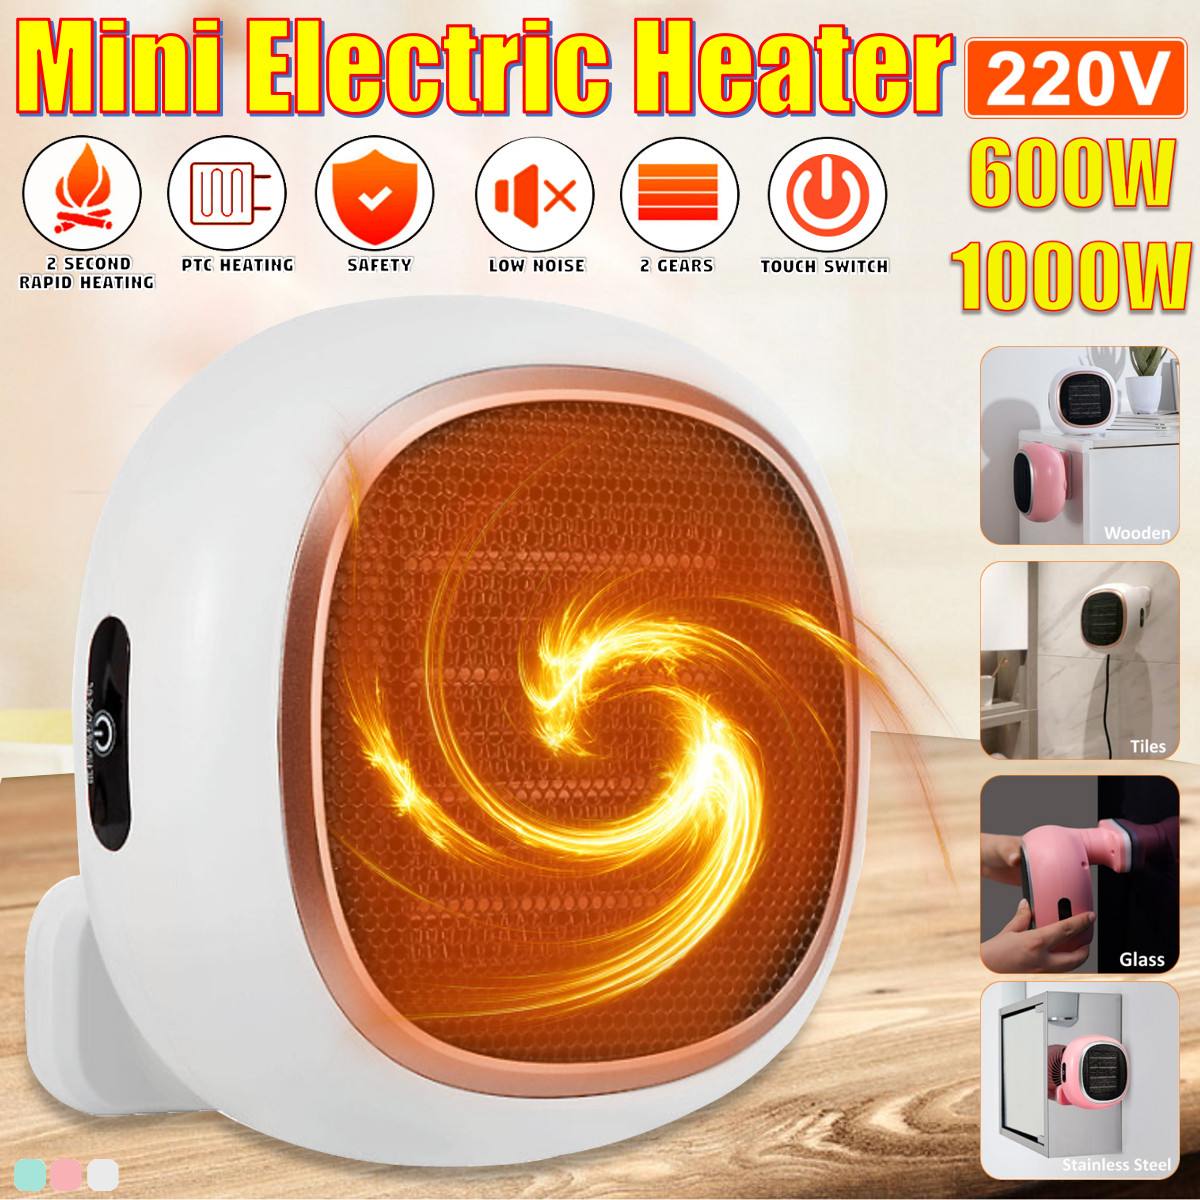 220V 1000W Portable Electric Space Heater Wall Mount Home Office Air Heater Warmer Fan Silent 2S Fast Heat Thermostat Blower